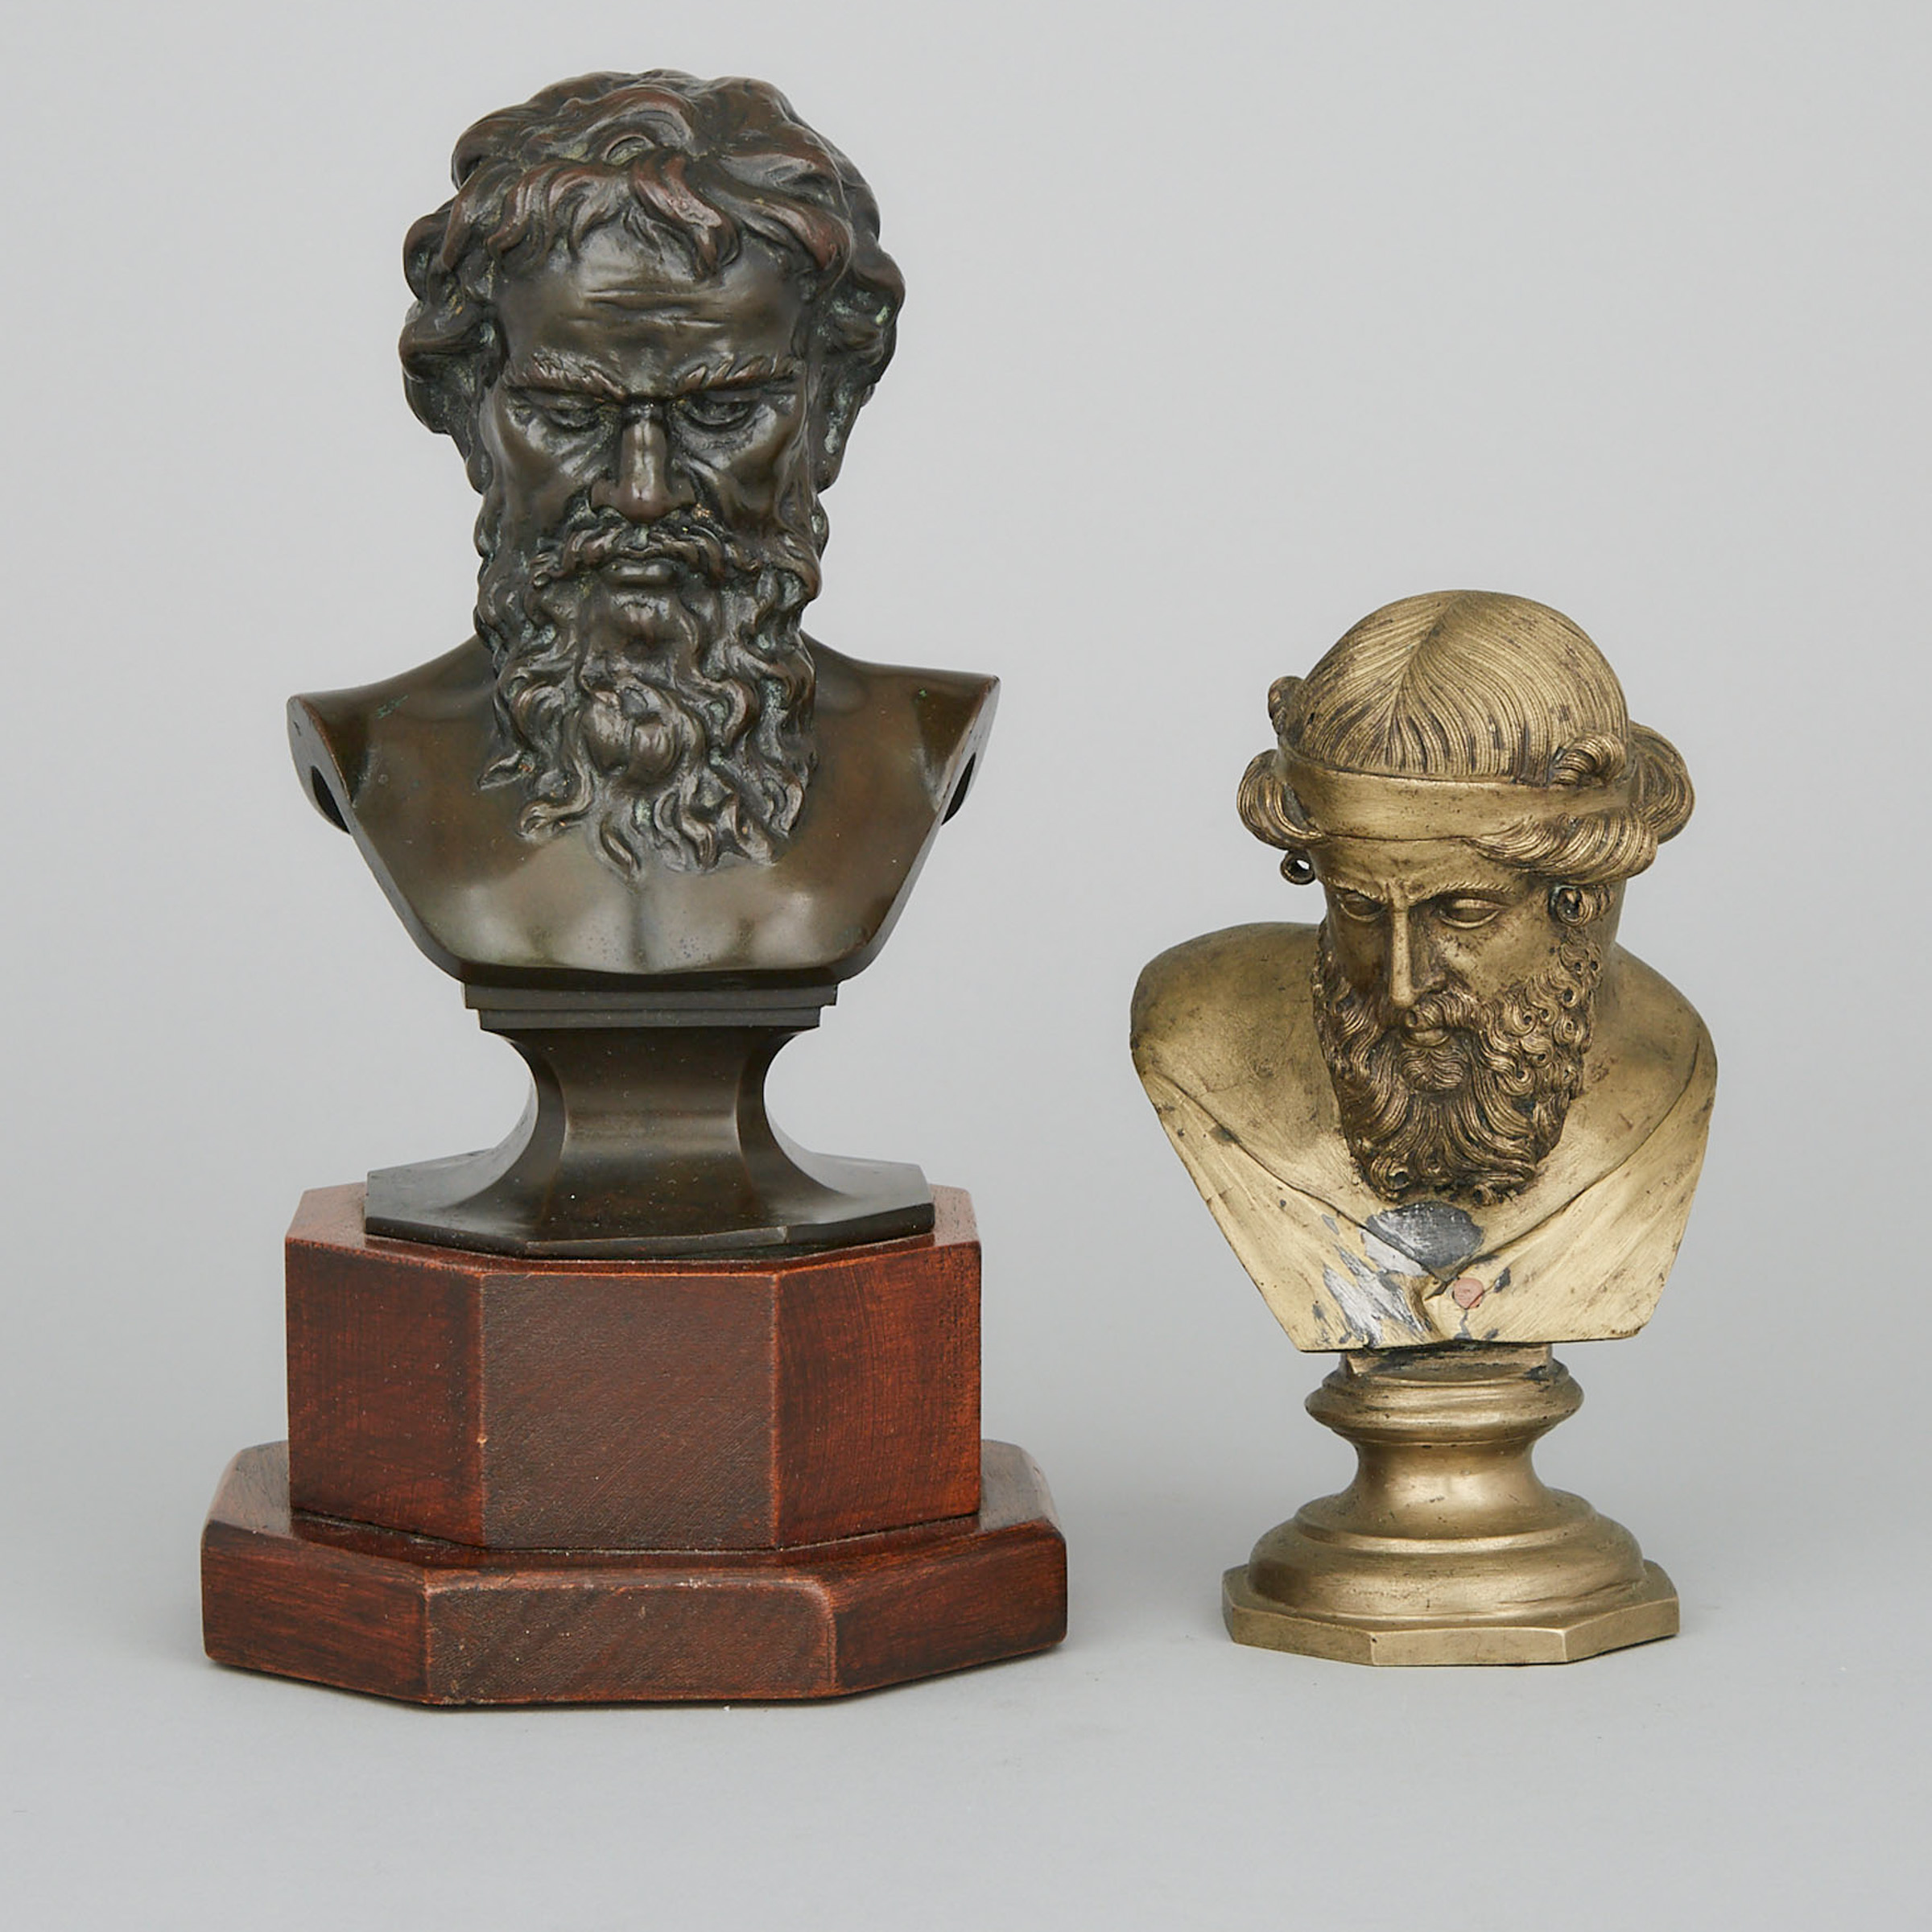 Two Italian Grand Tour Souvenir Classical Bronze Busts, Dionysus (or Plato) and Zeus, 19th and early 20th century